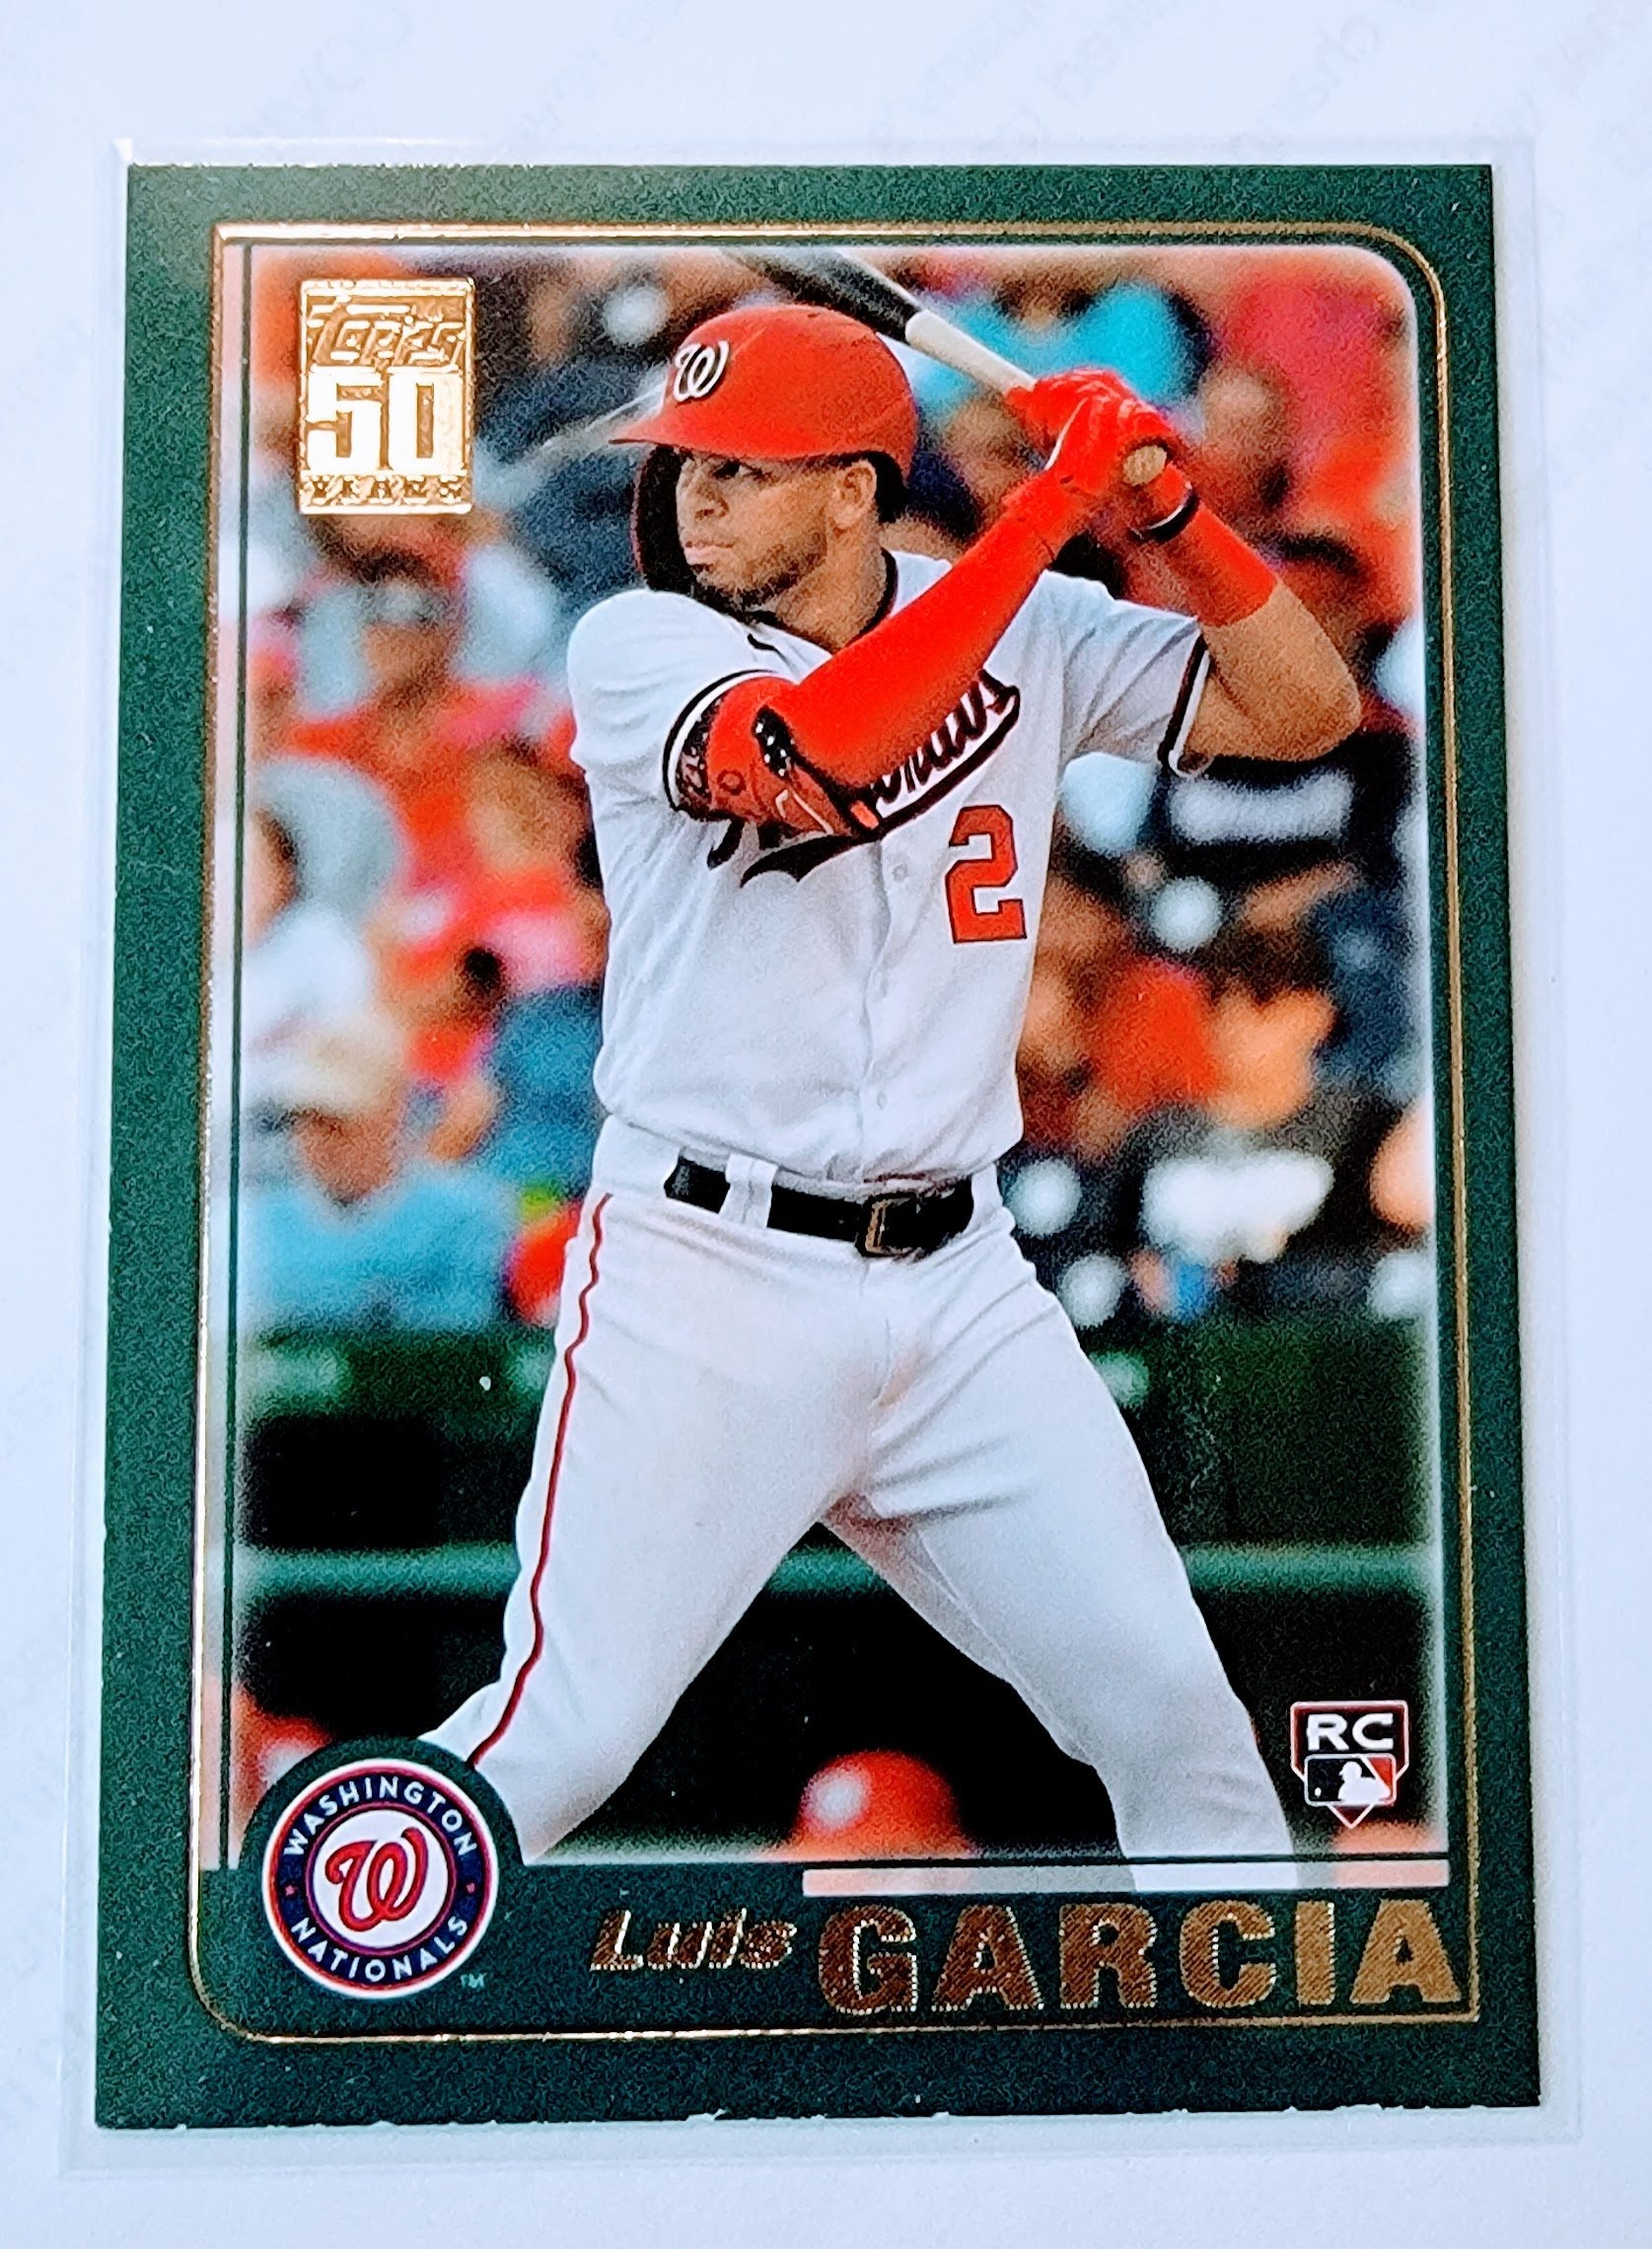 2021 Topps Archives Luis Garcia 2001 Rookie Baseball Trading Card SMCB1 simple Xclusive Collectibles   